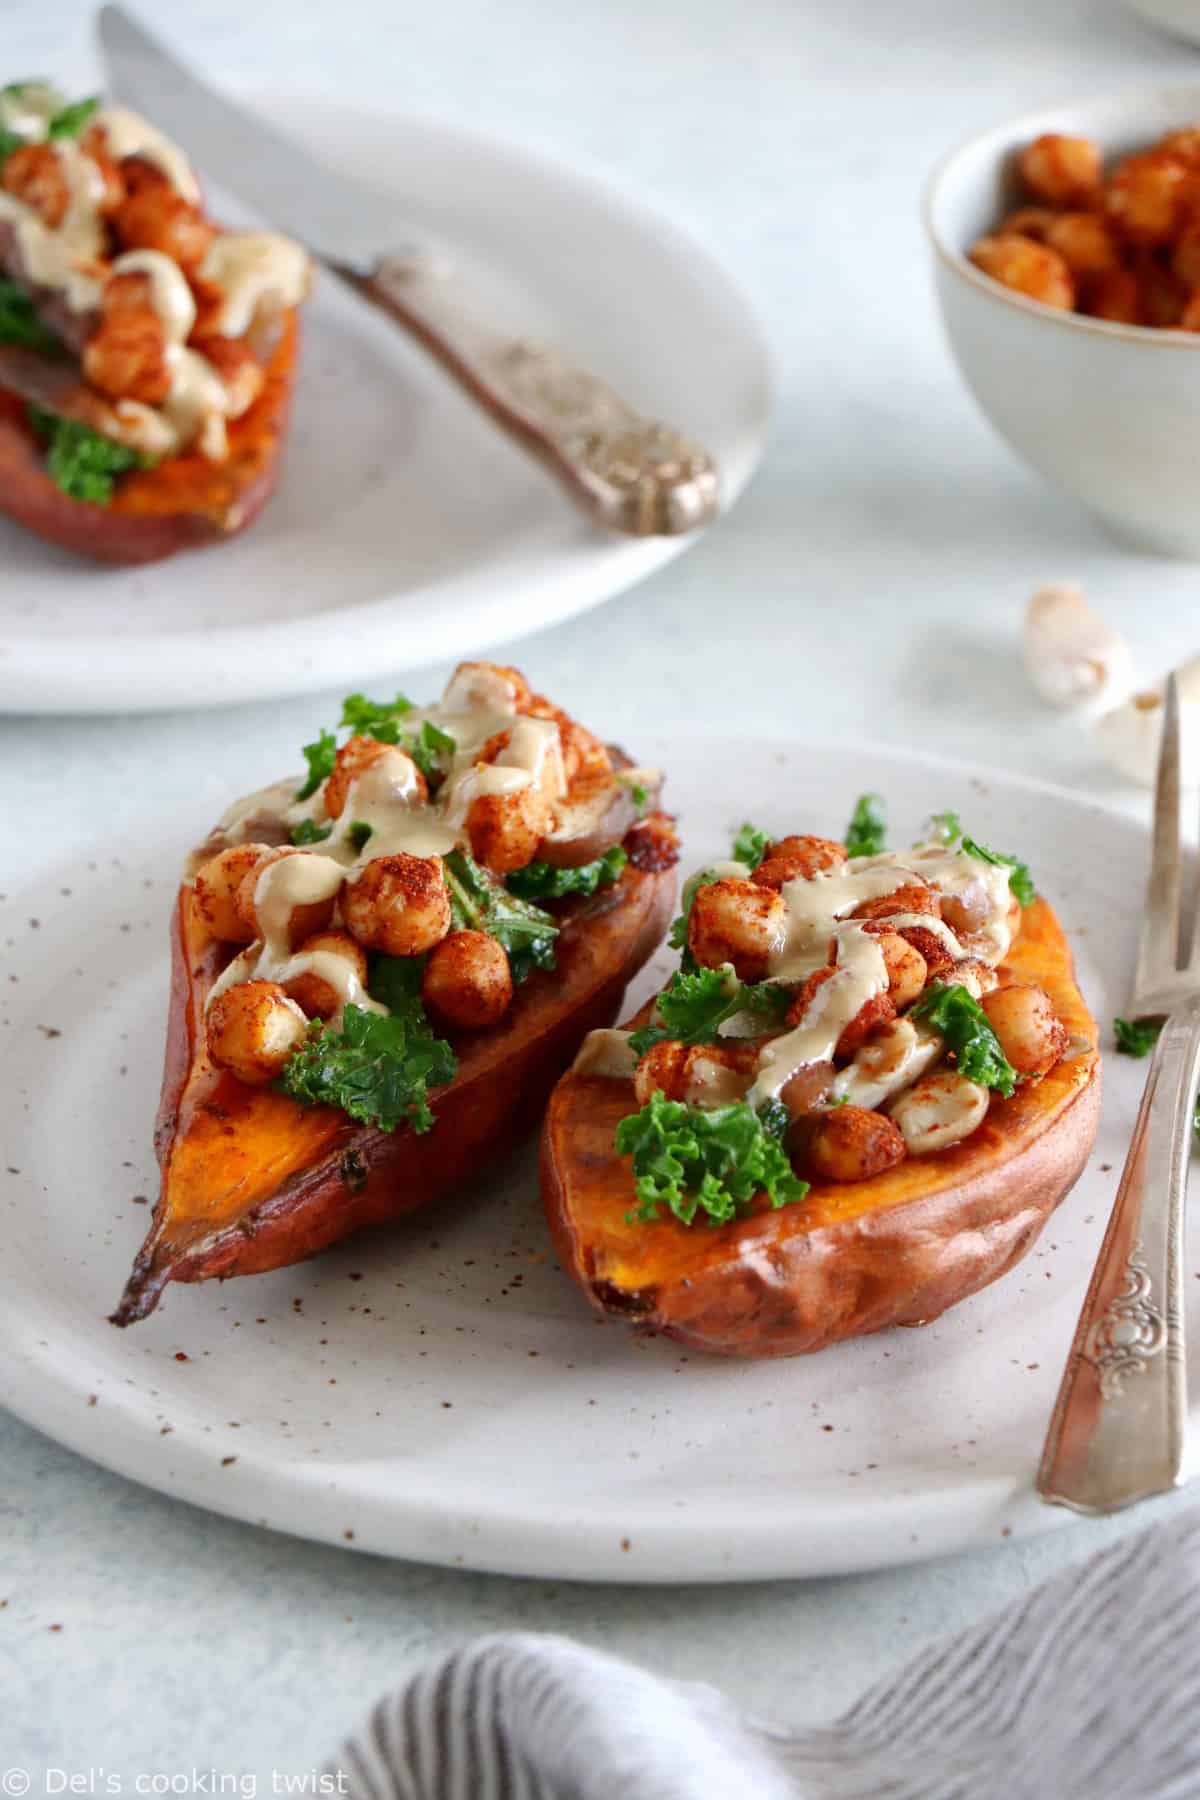 Fall harvest chickpea stuffed sweet potatoes are loaded with nutritious plant-based ingredients and make a delicious healthy, wholesome weeknight dinner.